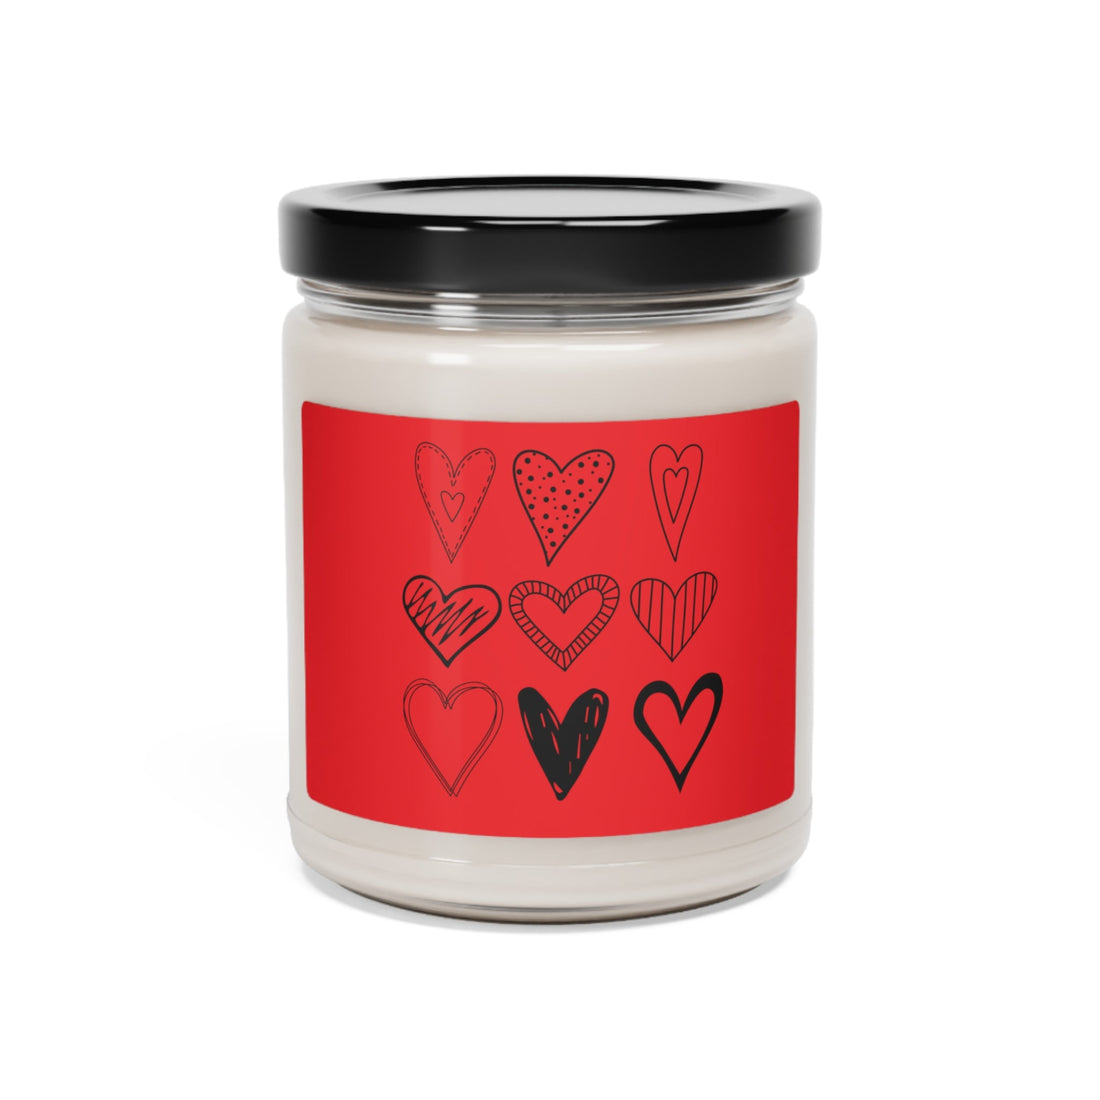 Hearts of Love Scented Soy Candle, 9oz - Home Decor - Positively Sassy - Hearts of Love Scented Soy Candle, 9oz